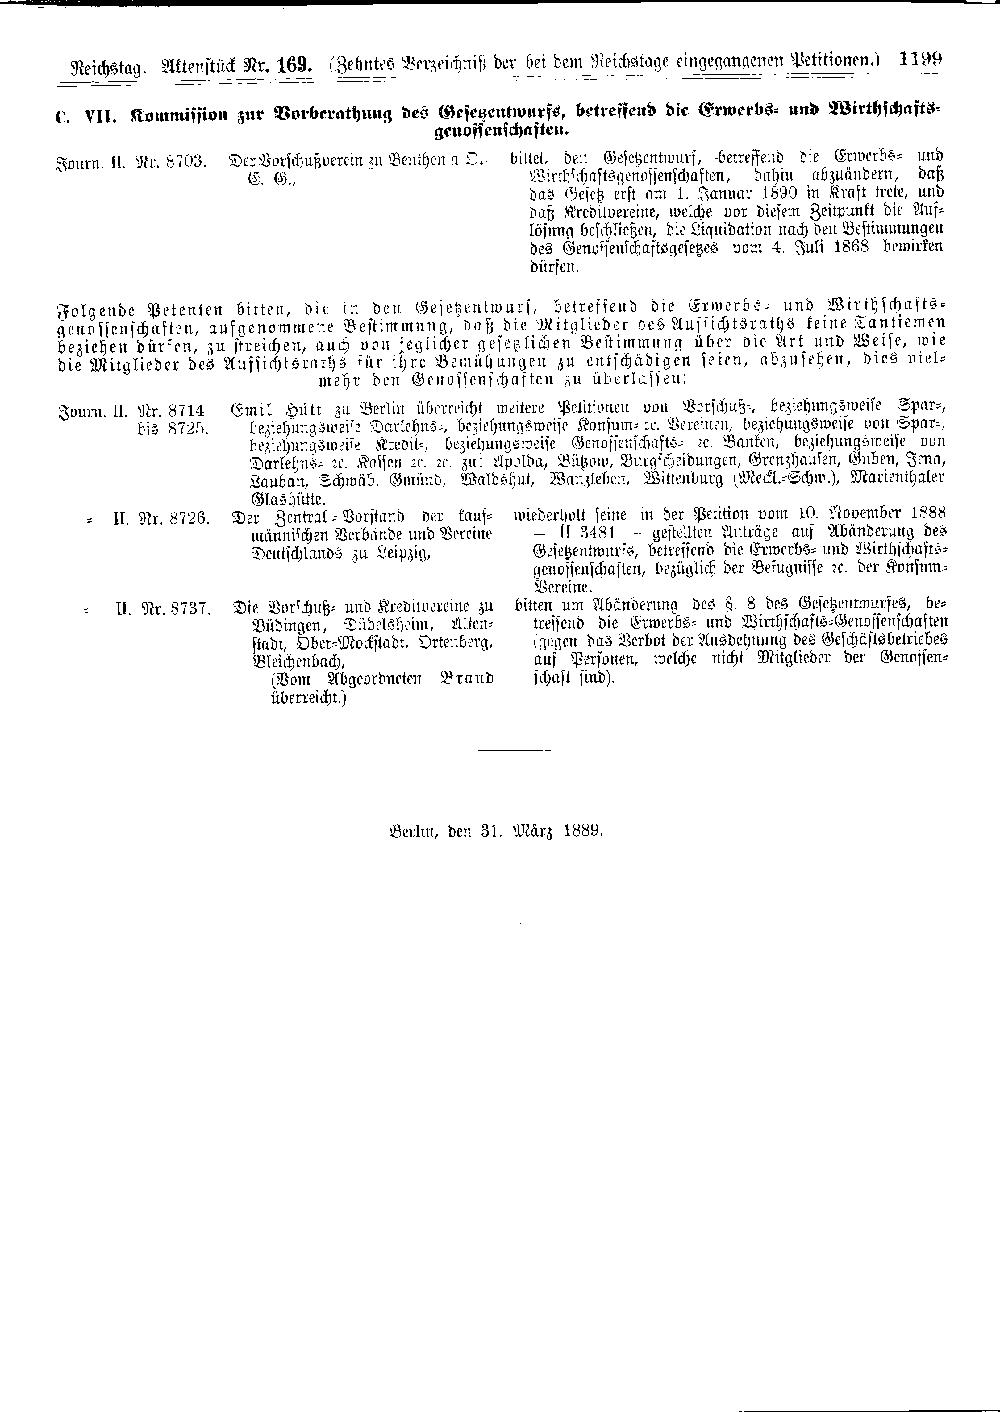 Scan of page 1199